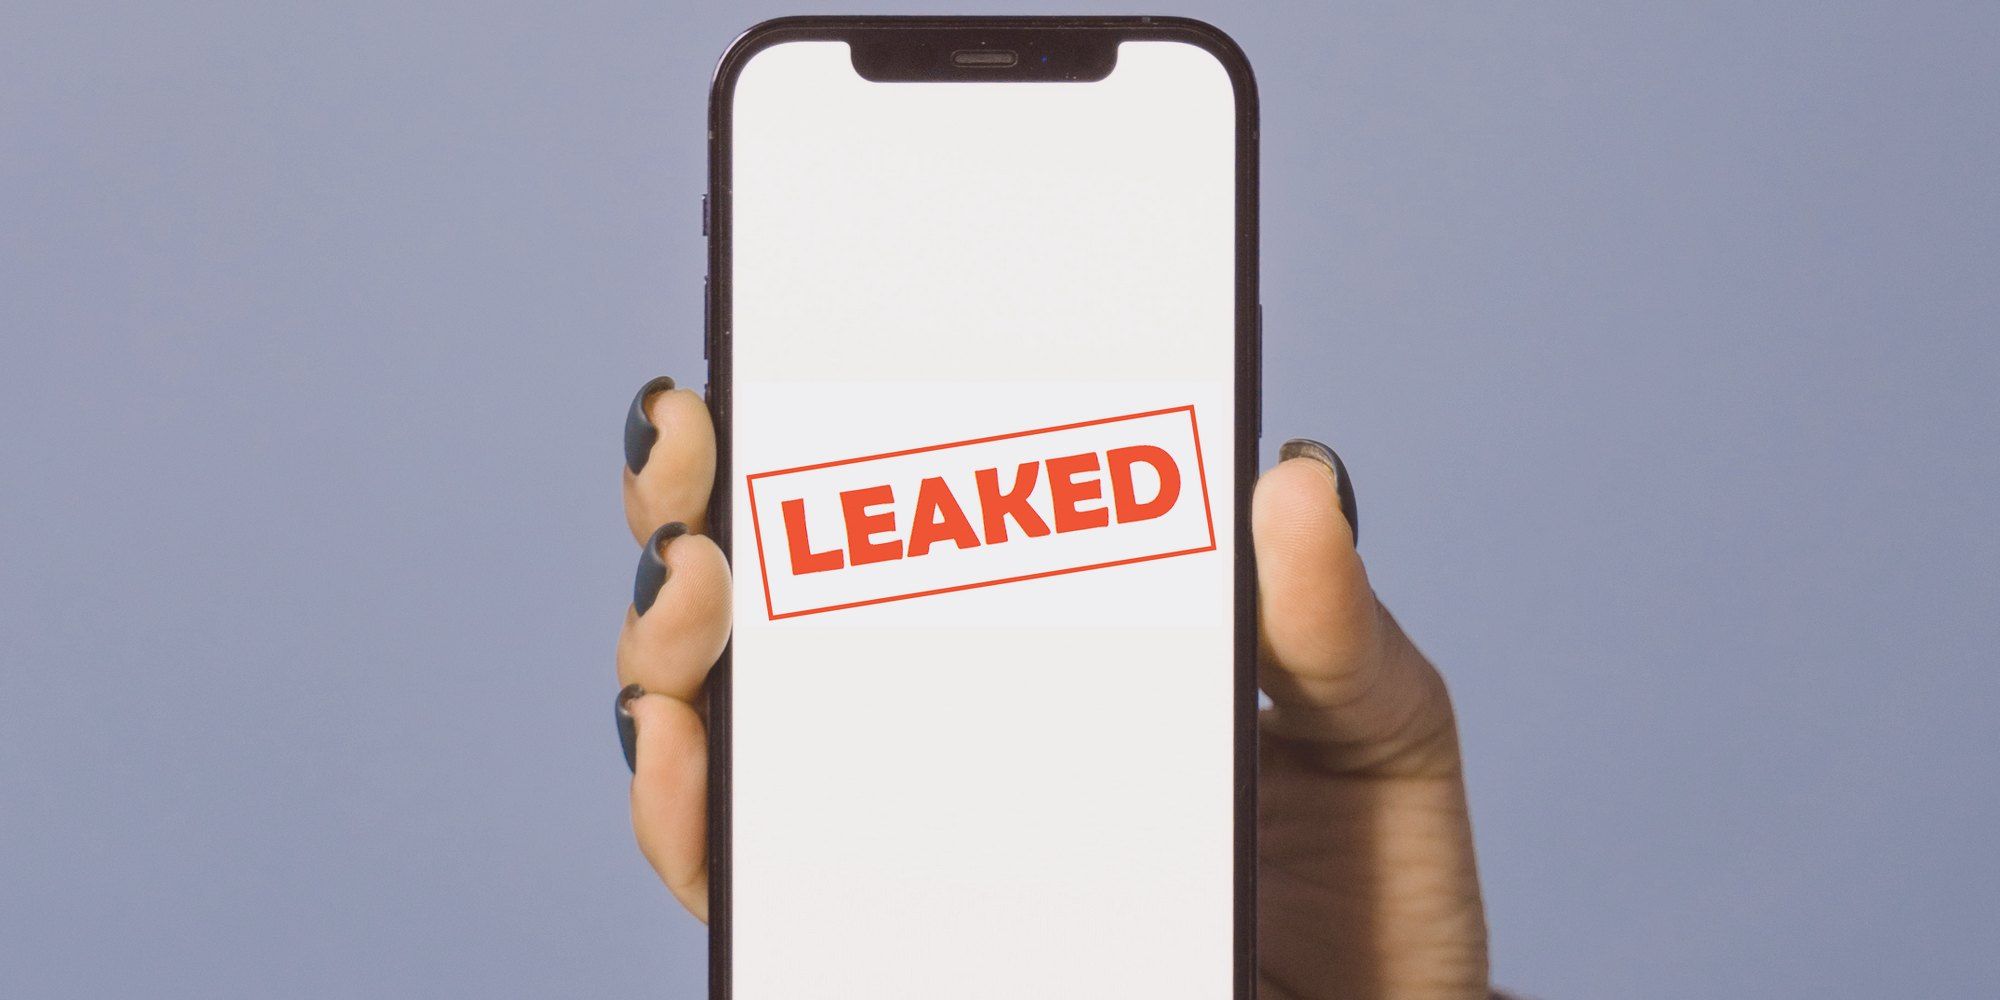 Apple iPhone Leaksters Threatened With Jail Time